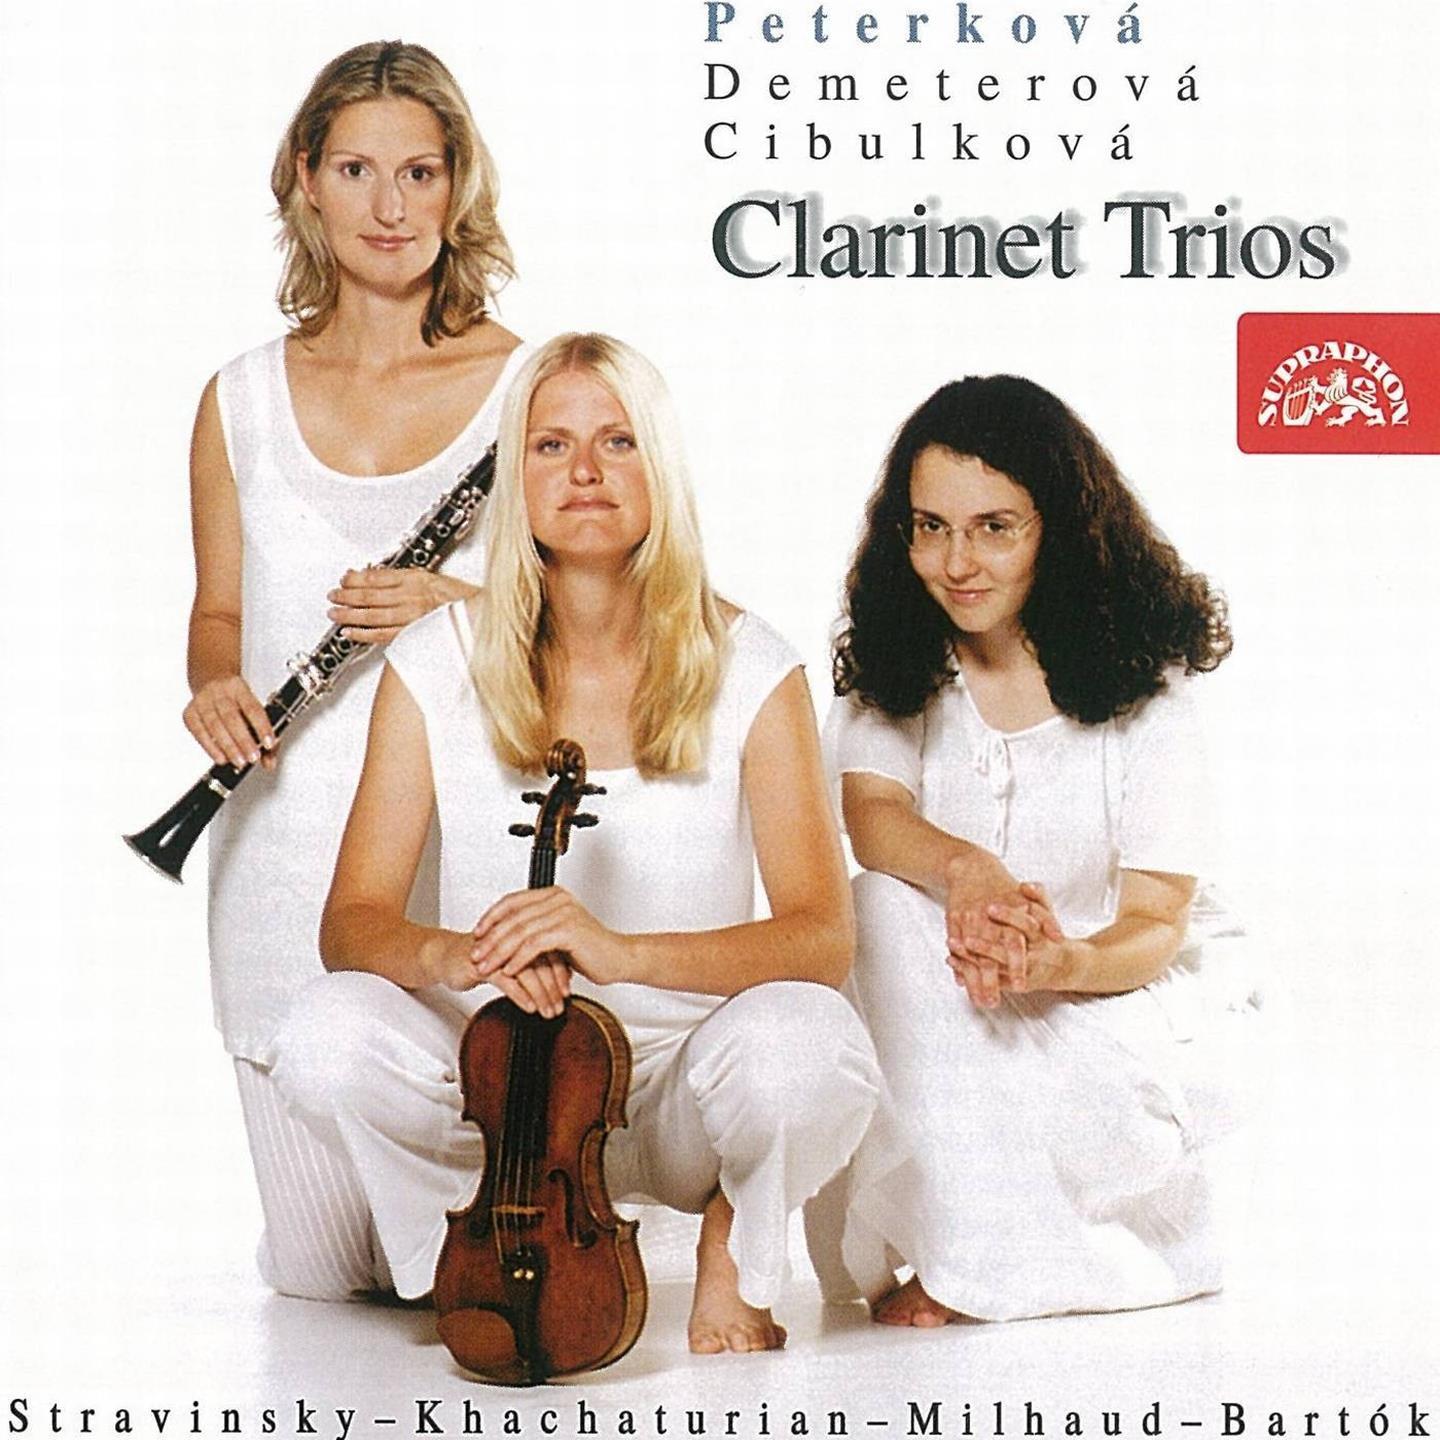 Suite for Violin, Clarinet and Piano, Op. 157b: III. Jeu. Vif